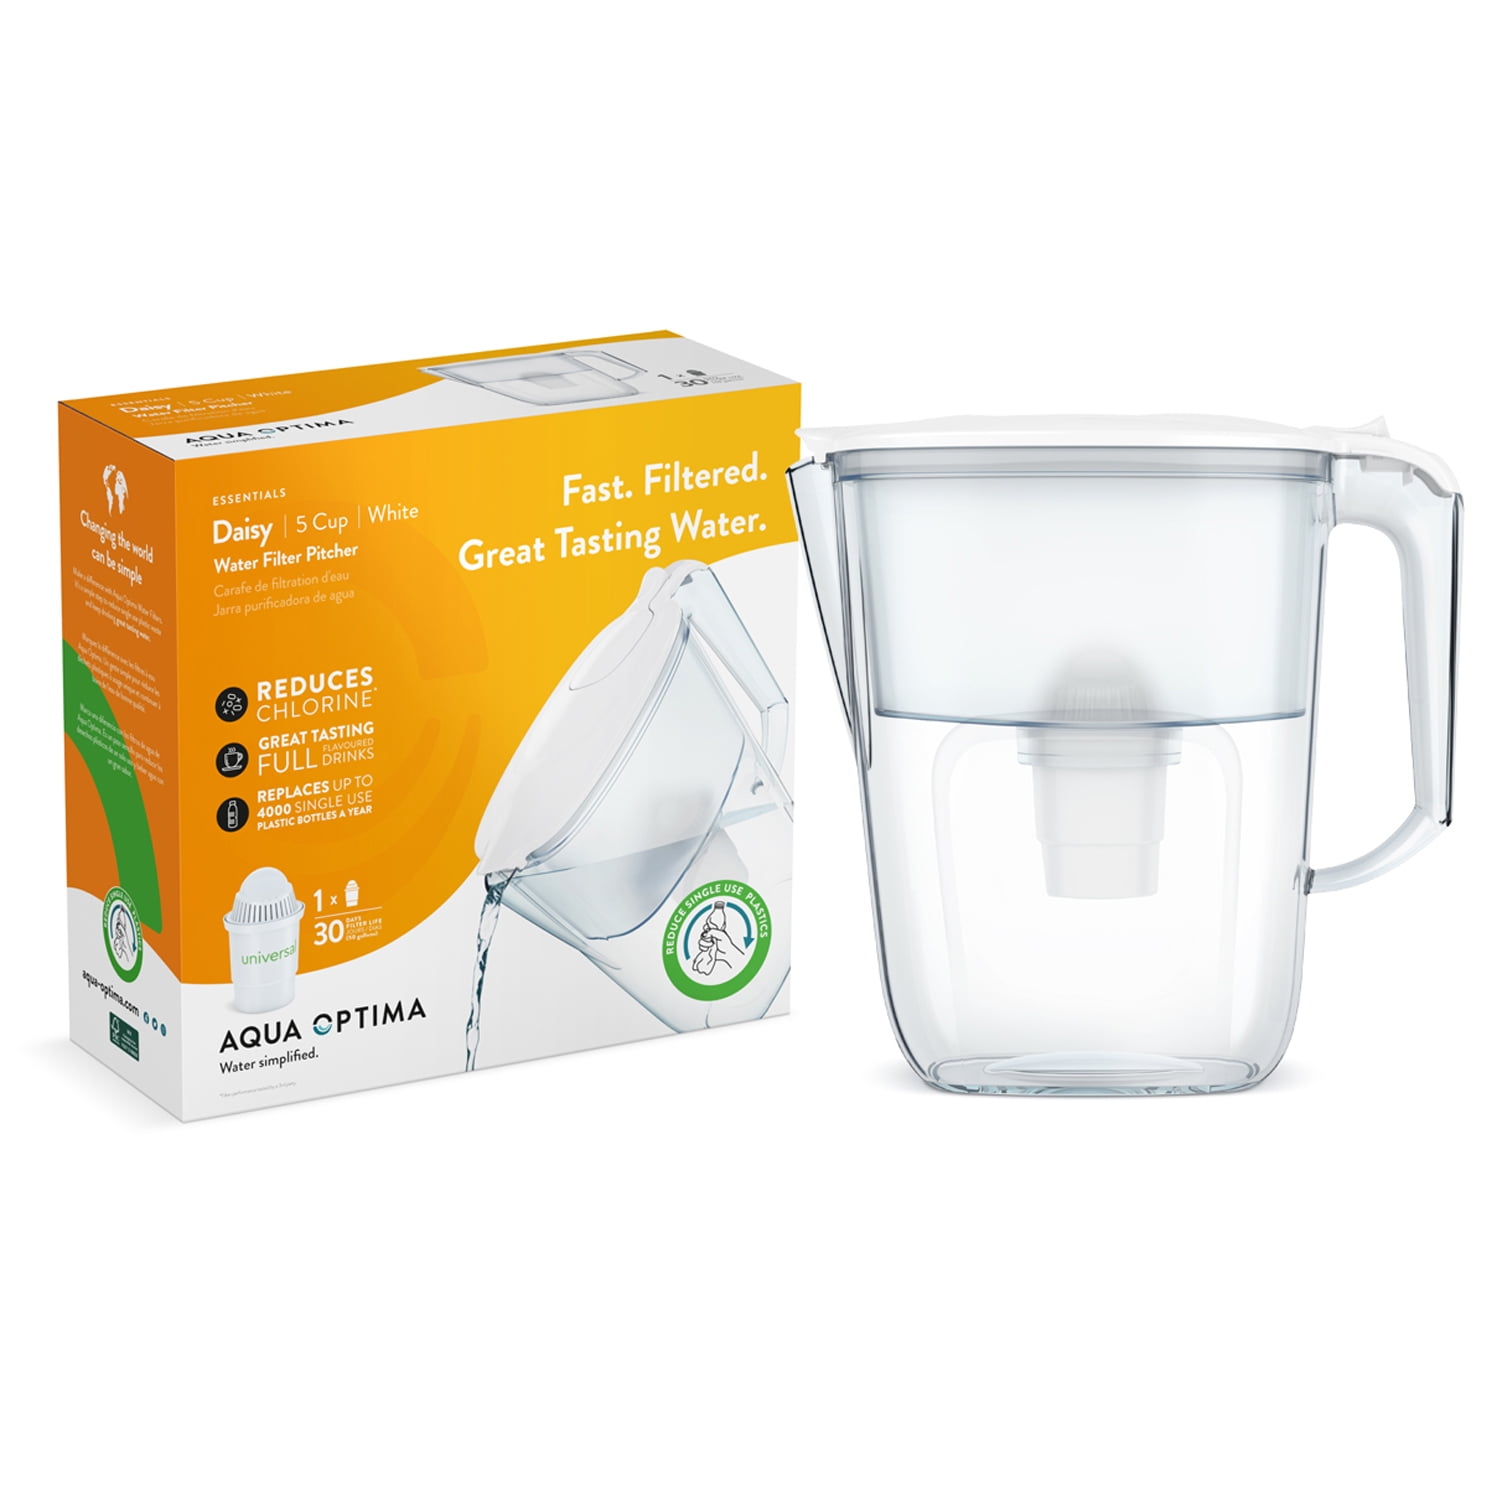 Aqua Optima Water Filter Pitcher for Tap and Drinking Water with 1 Compact  Filter. BPA Free, WQA Certified, Daisy Design (White)